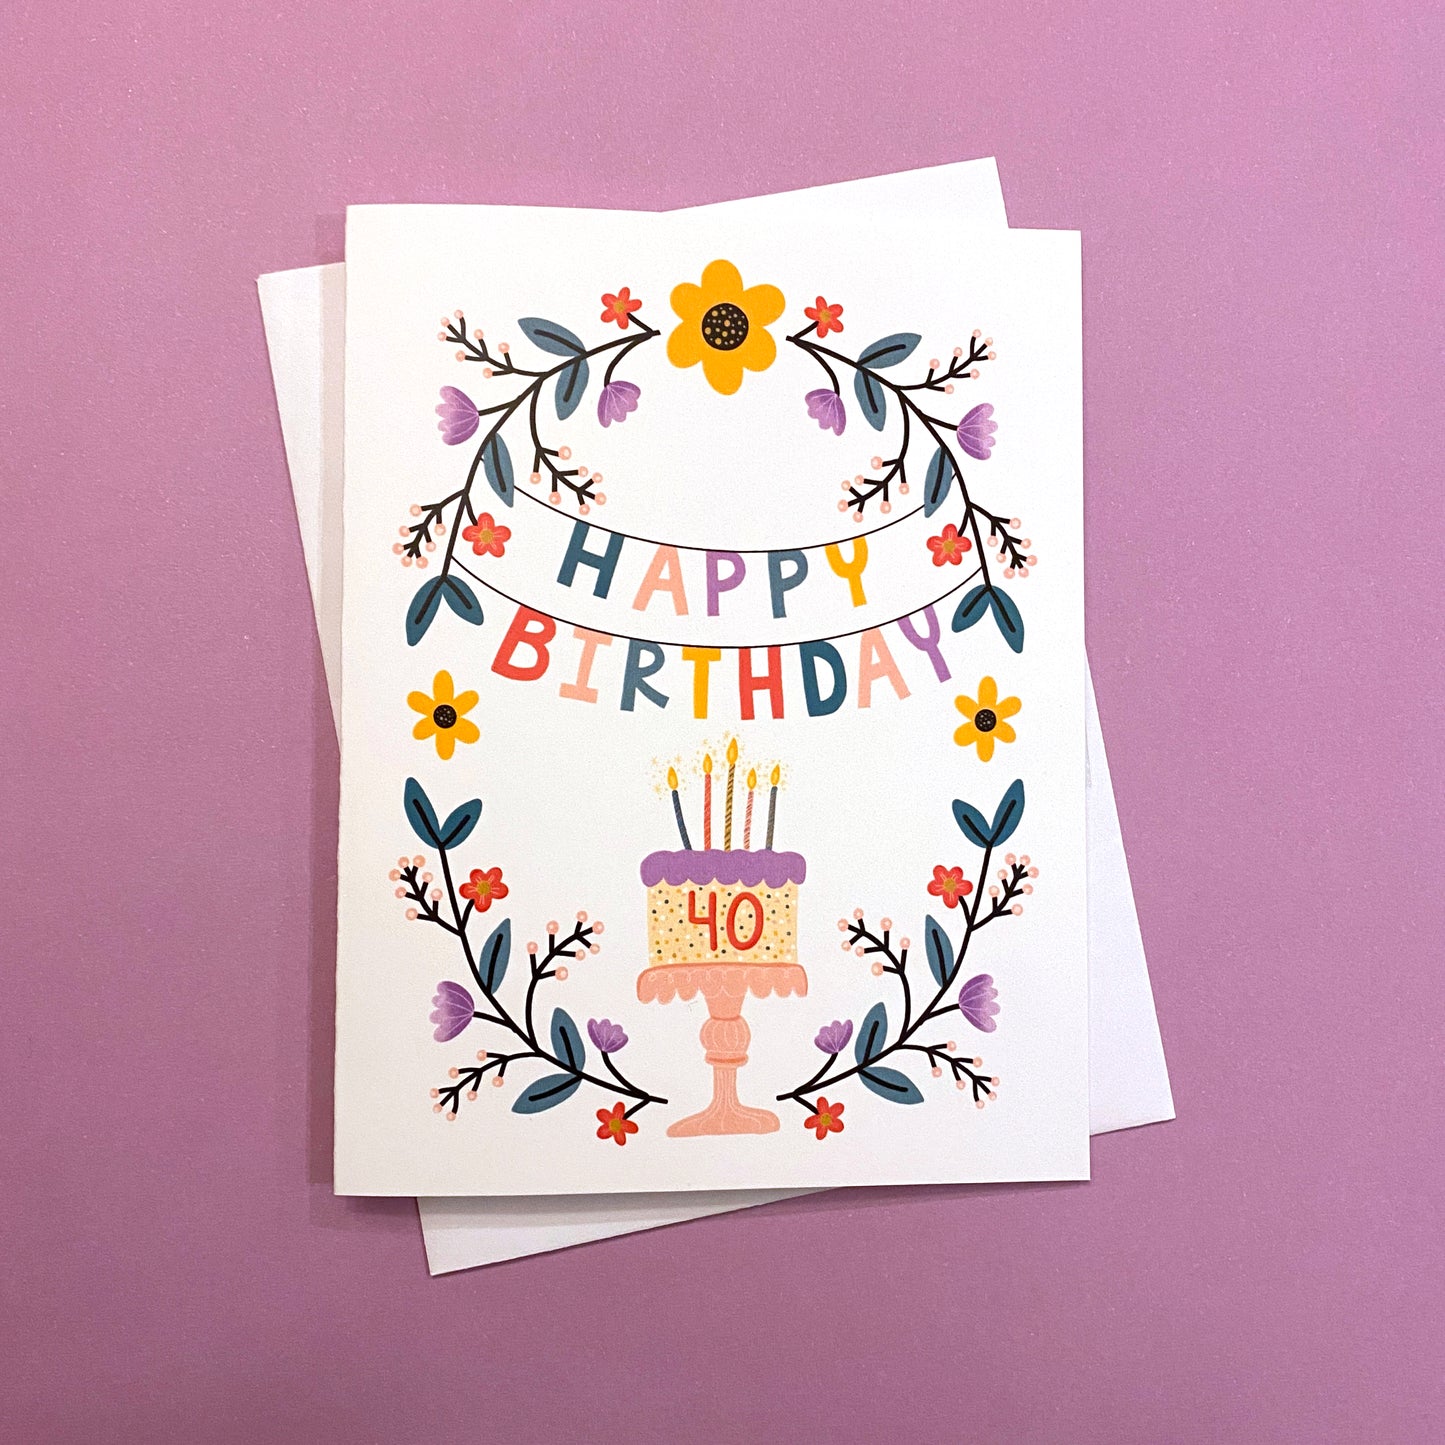 40th Birthday Card with beautiful floral design and birthday cake. Size A2 greeting card (4.25" x 5.5") with envelope, blank Inside. All cards are designed and Illustrated with love by me, Anna Fox, and are printed at my friendly neighborhood print shop in Denver, CO.